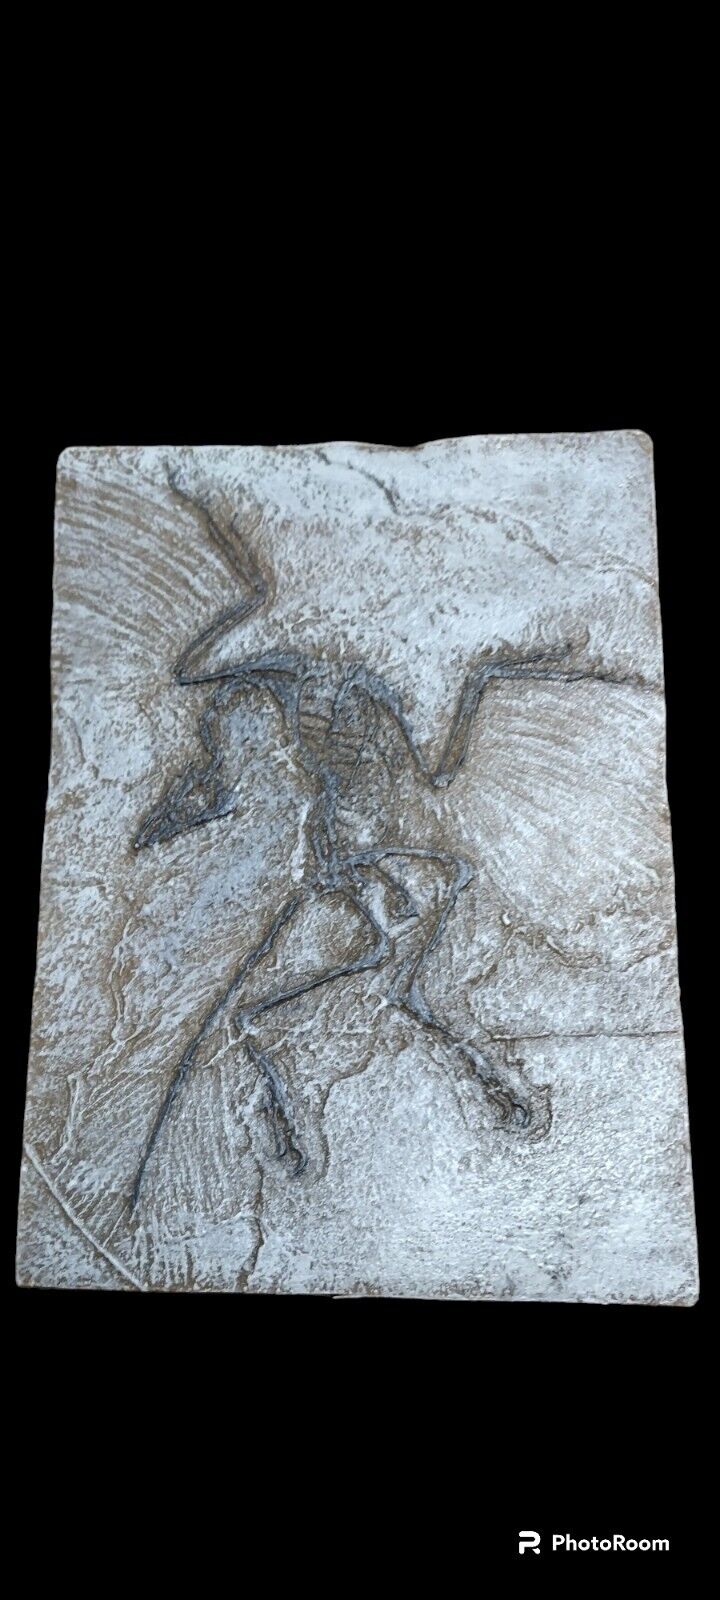 archaeopteryx Lithographica fossil replica